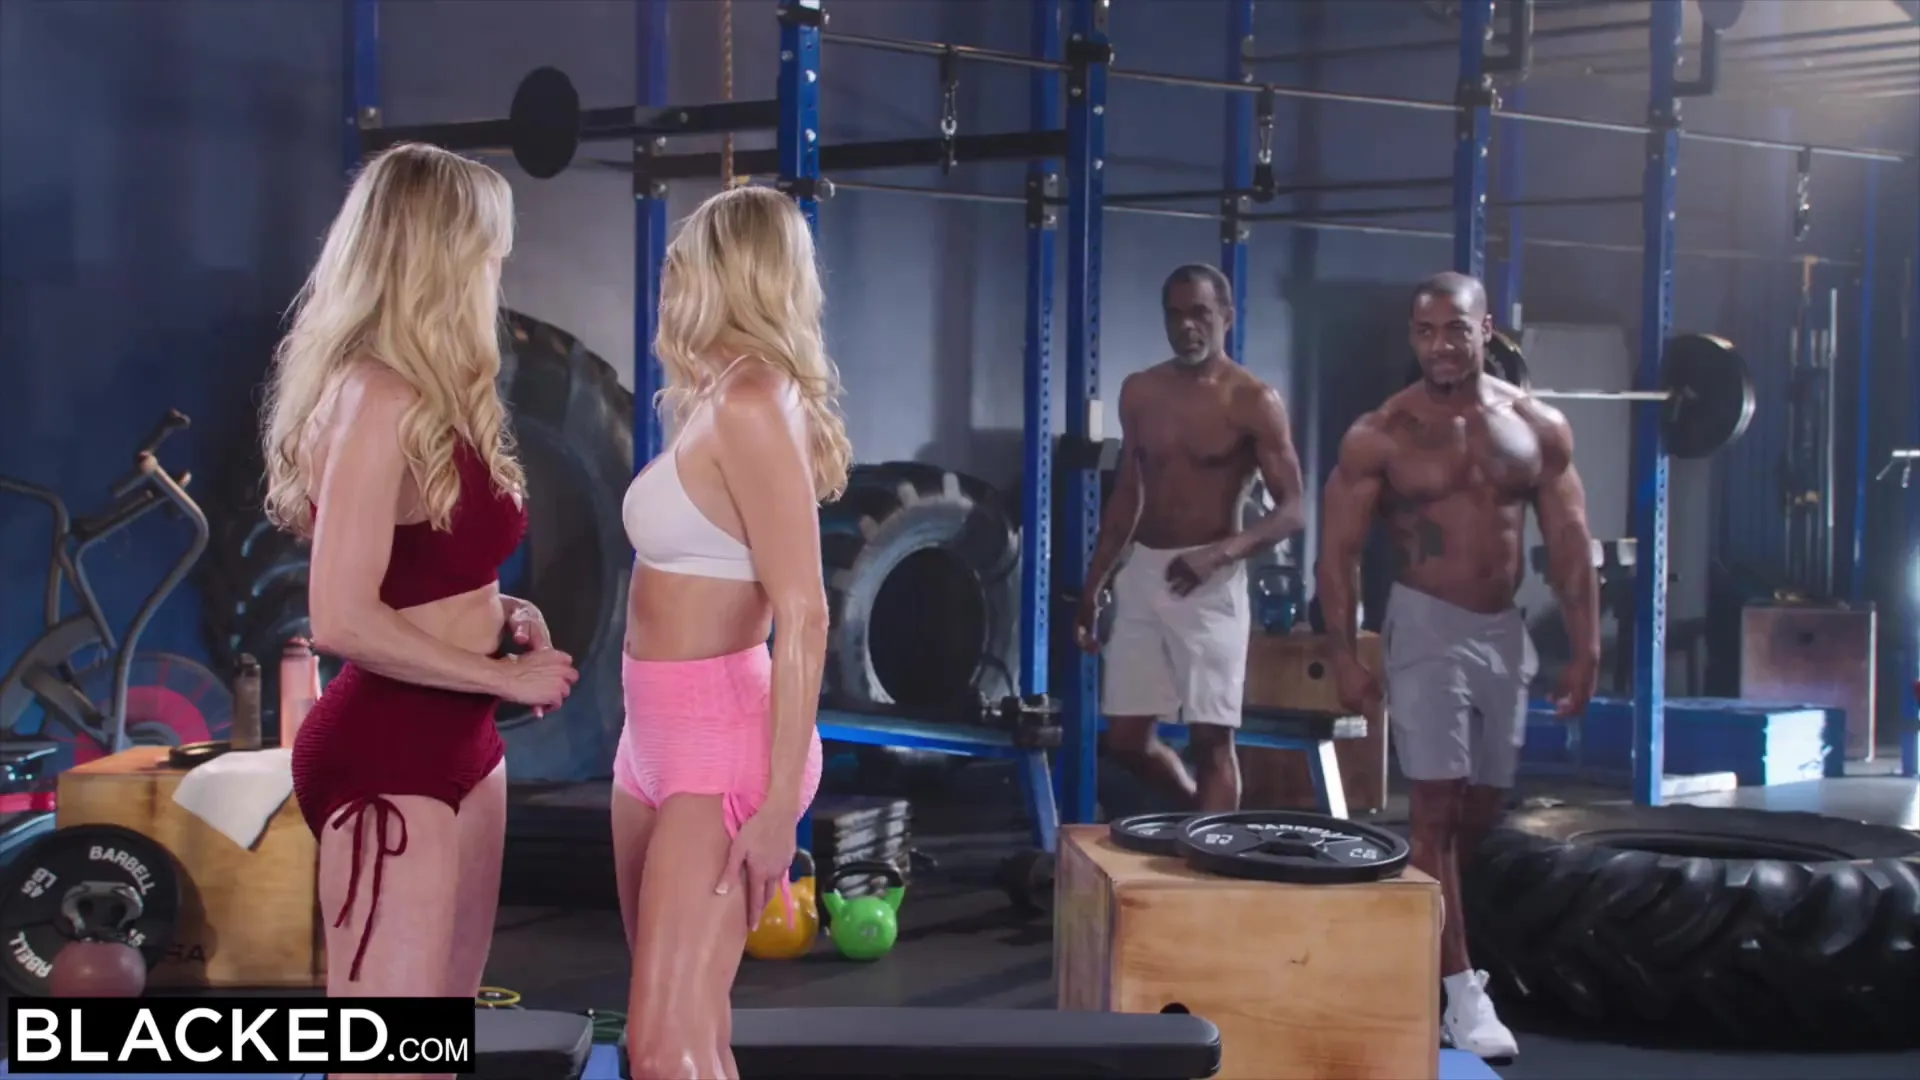 GYM Babes Brandi Love and Kenzie Anne fucked raw by black bodybuilders in foursome! pic